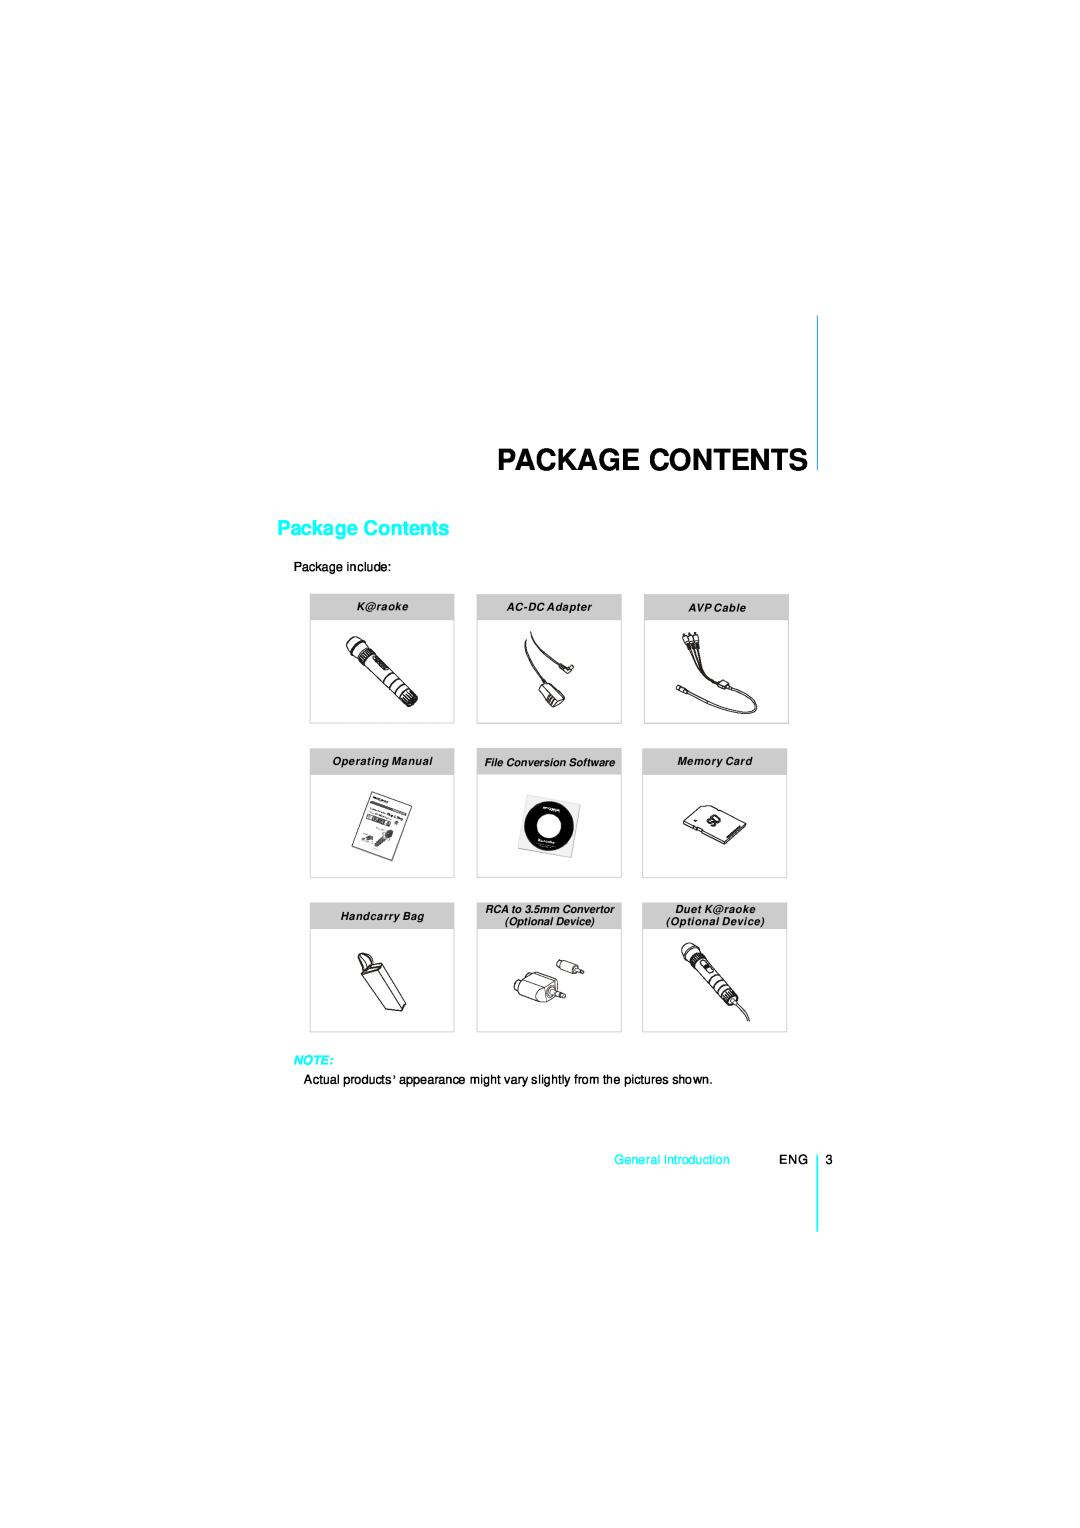 NextBase Microphone manual Package Contents, General Introduction 